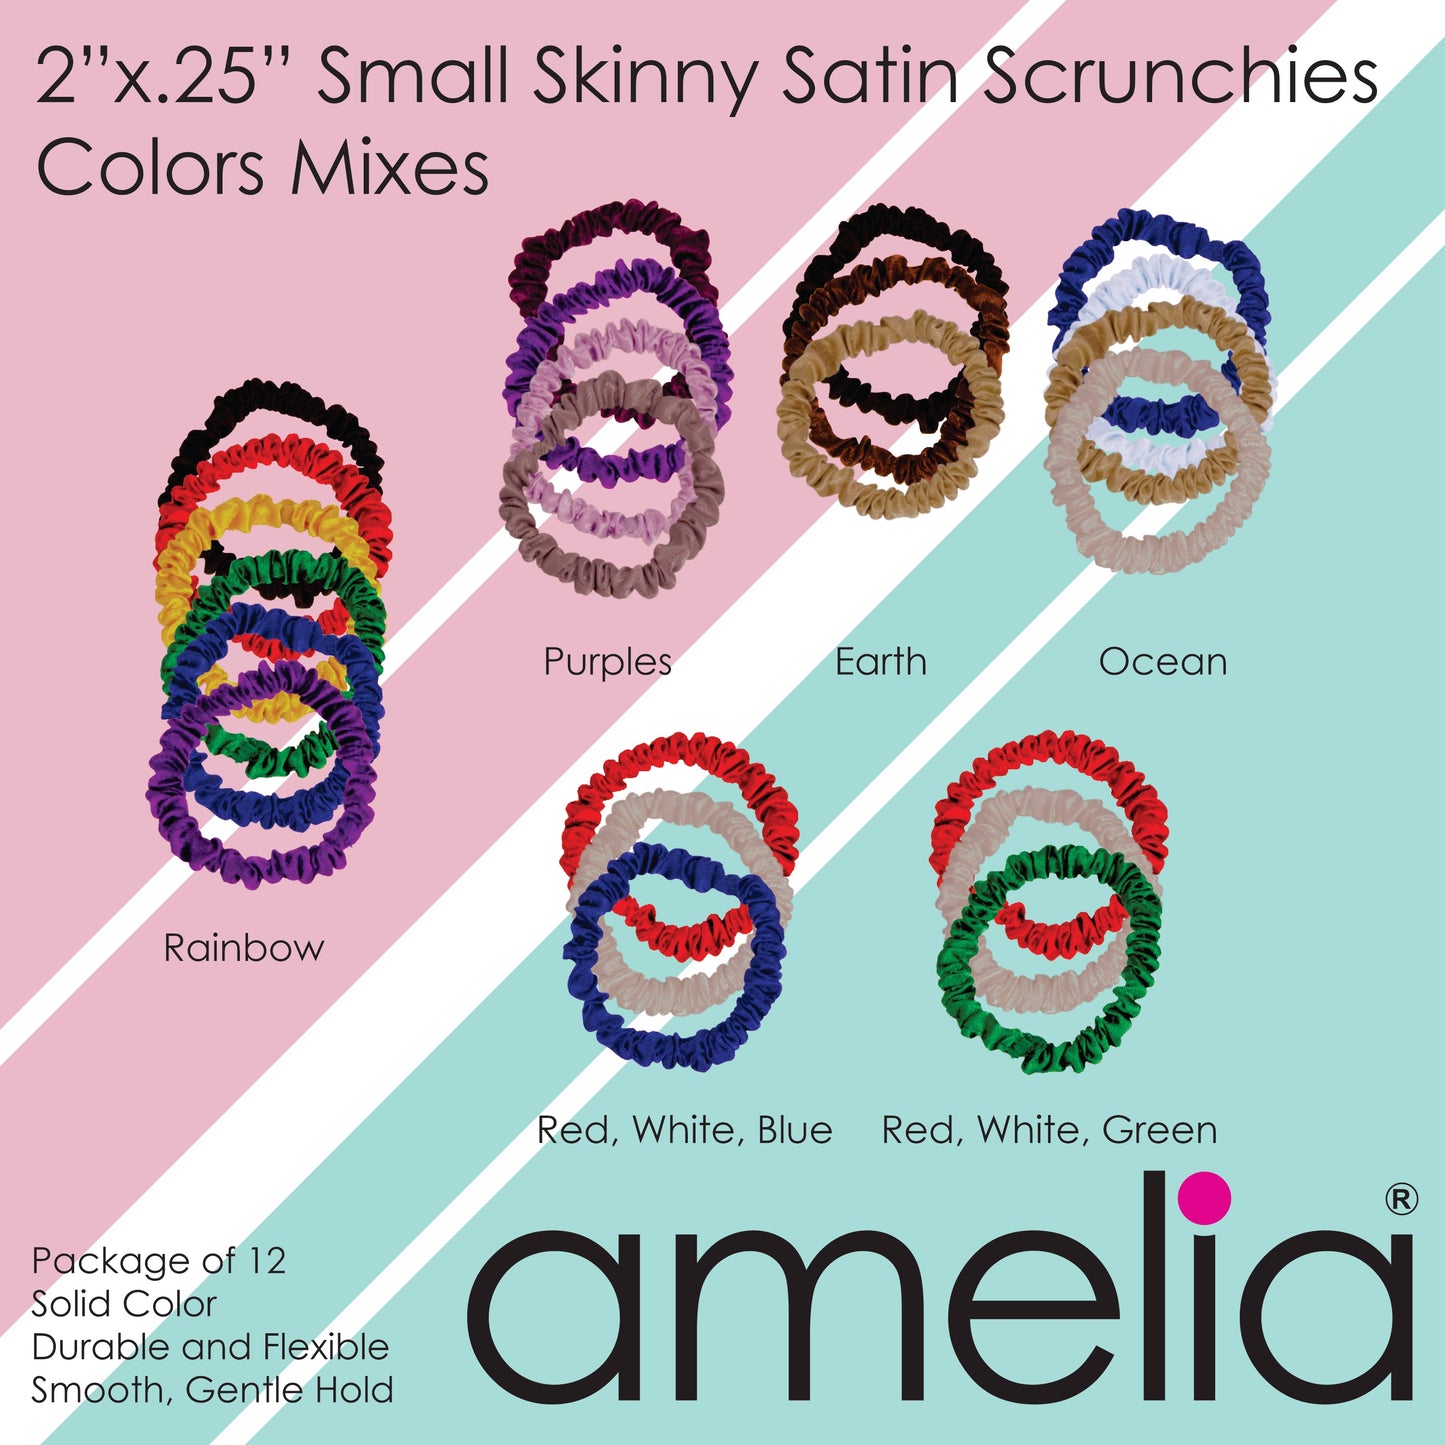 Amelia Beauty, White Skinny Satin Scrunchies, 2in Diameter, Gentle and Strong Hold, No Snag, No Dents or Creases. 12 Pack